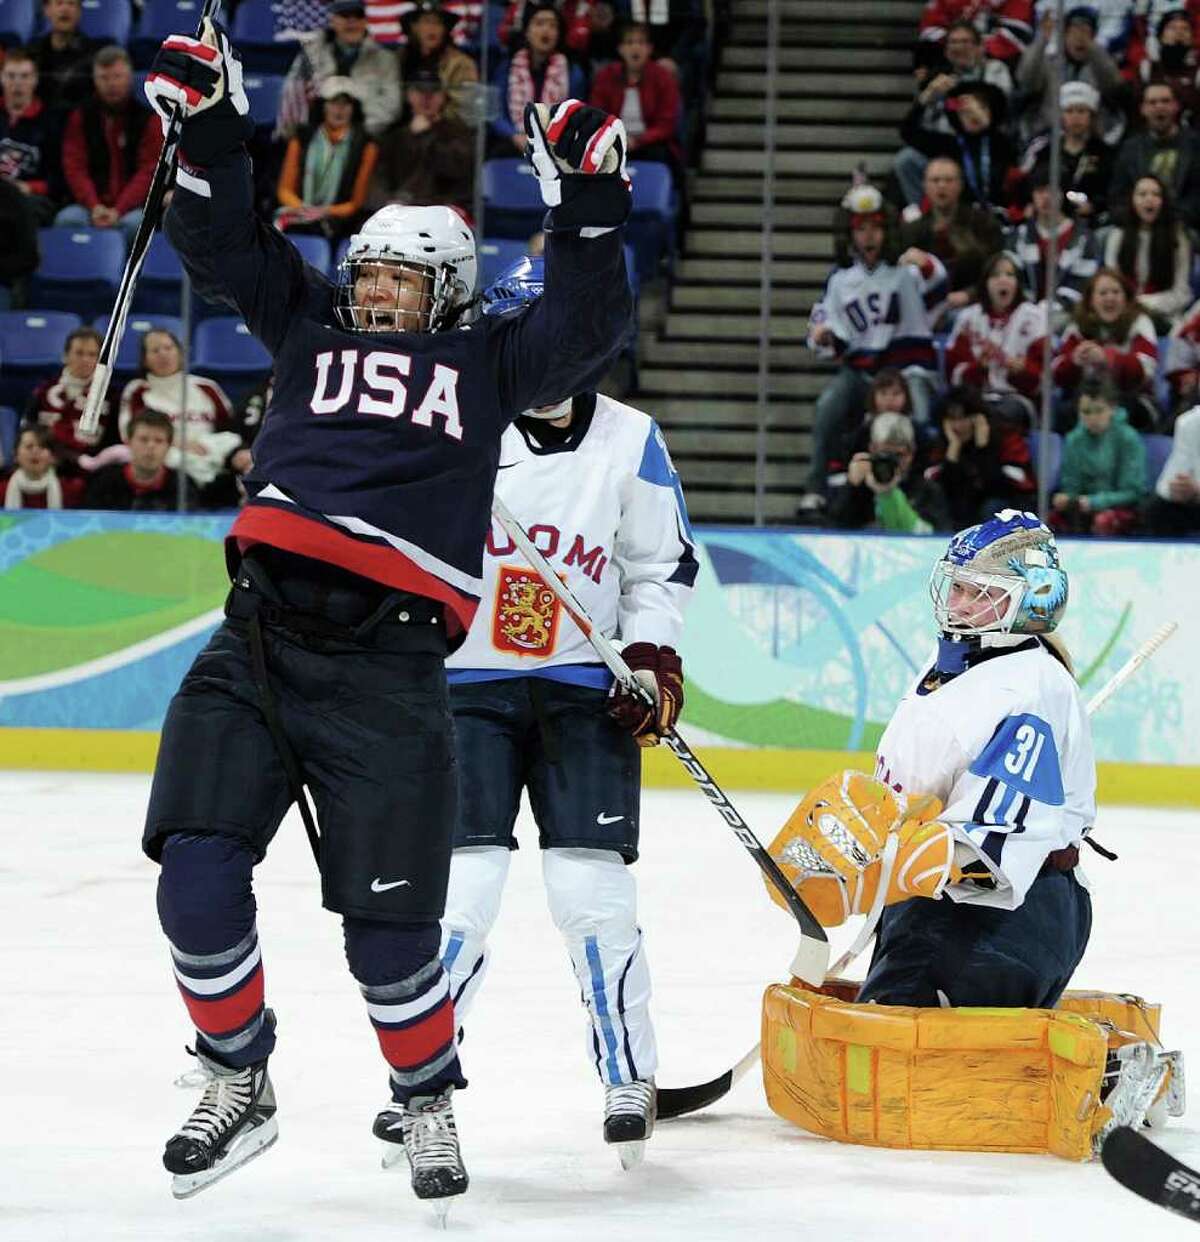 VANCOUVER, BC - FEBRUARY 18: Julie Chu of The United States celebrates scoring their first goal during the ice hockey women's preliminary game between USA and Finland on day 7 of the 2010 Vancouver Winter Olympics at UBC Thunderbird Arena on February 18, 2010 in Vancouver, Canada. (Photo by Harry How/Getty Images)